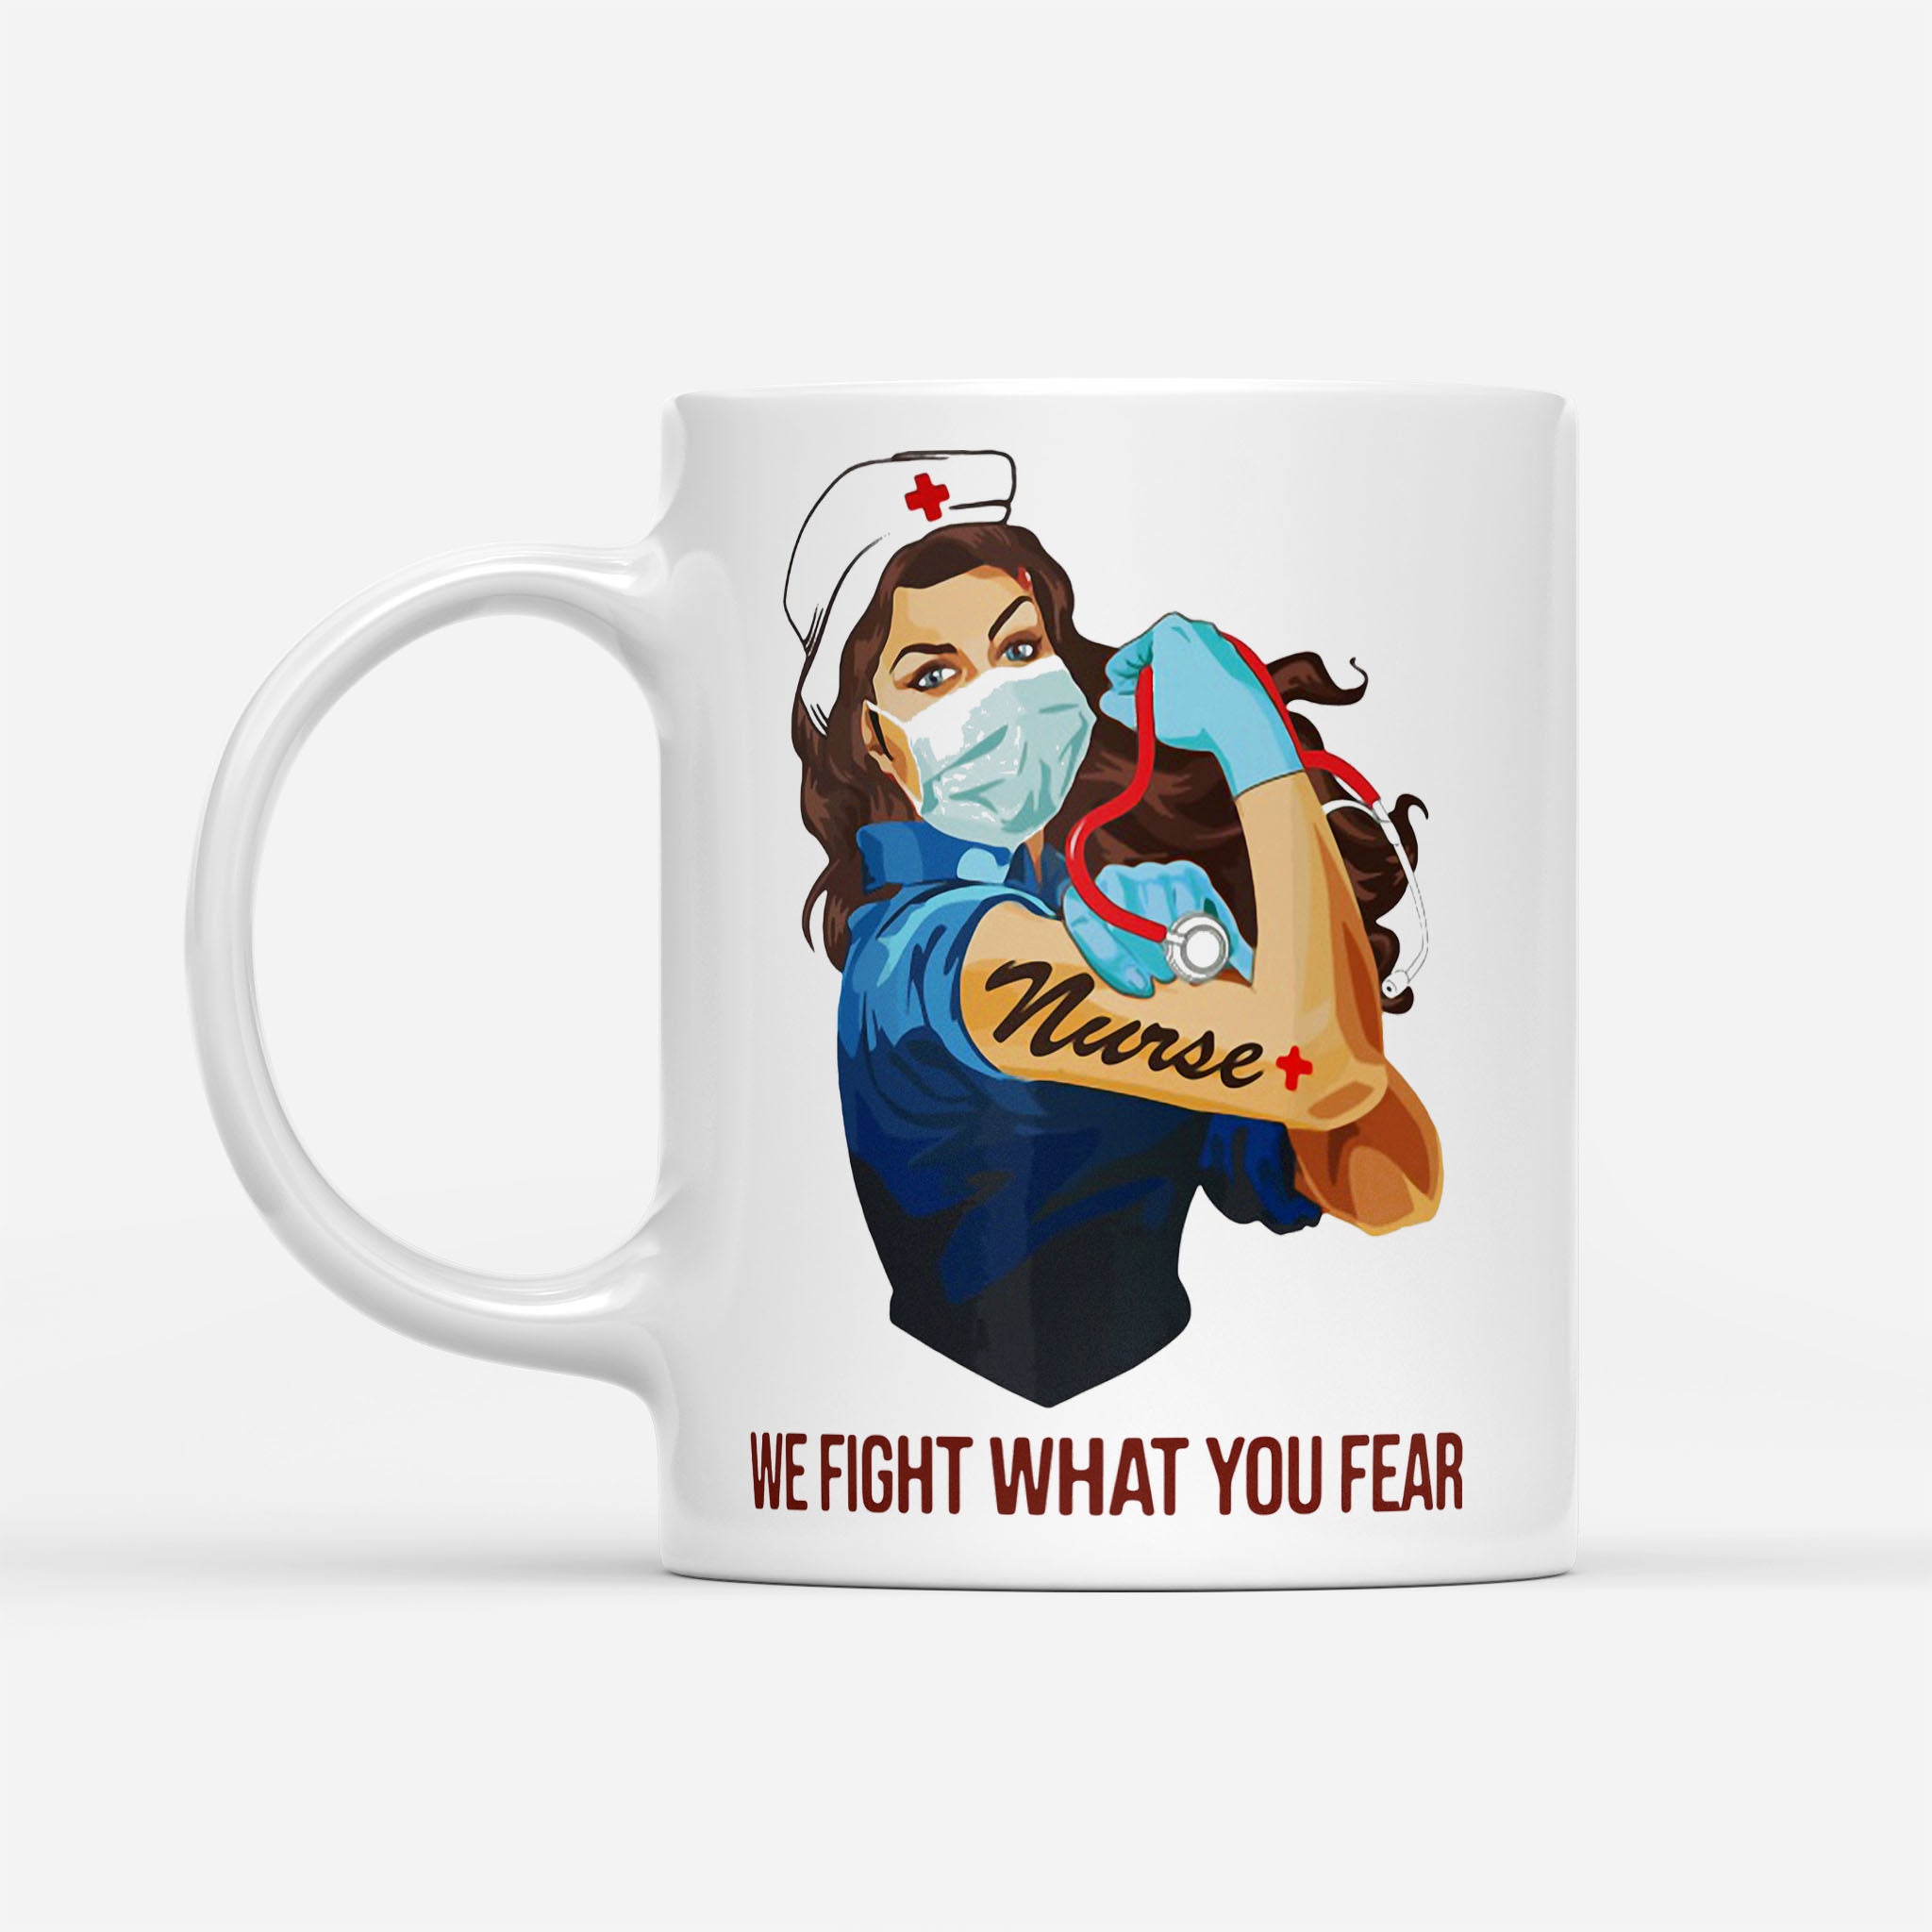 Strong Woman Tattoo Nurse We Fight What You Fear - White Mug